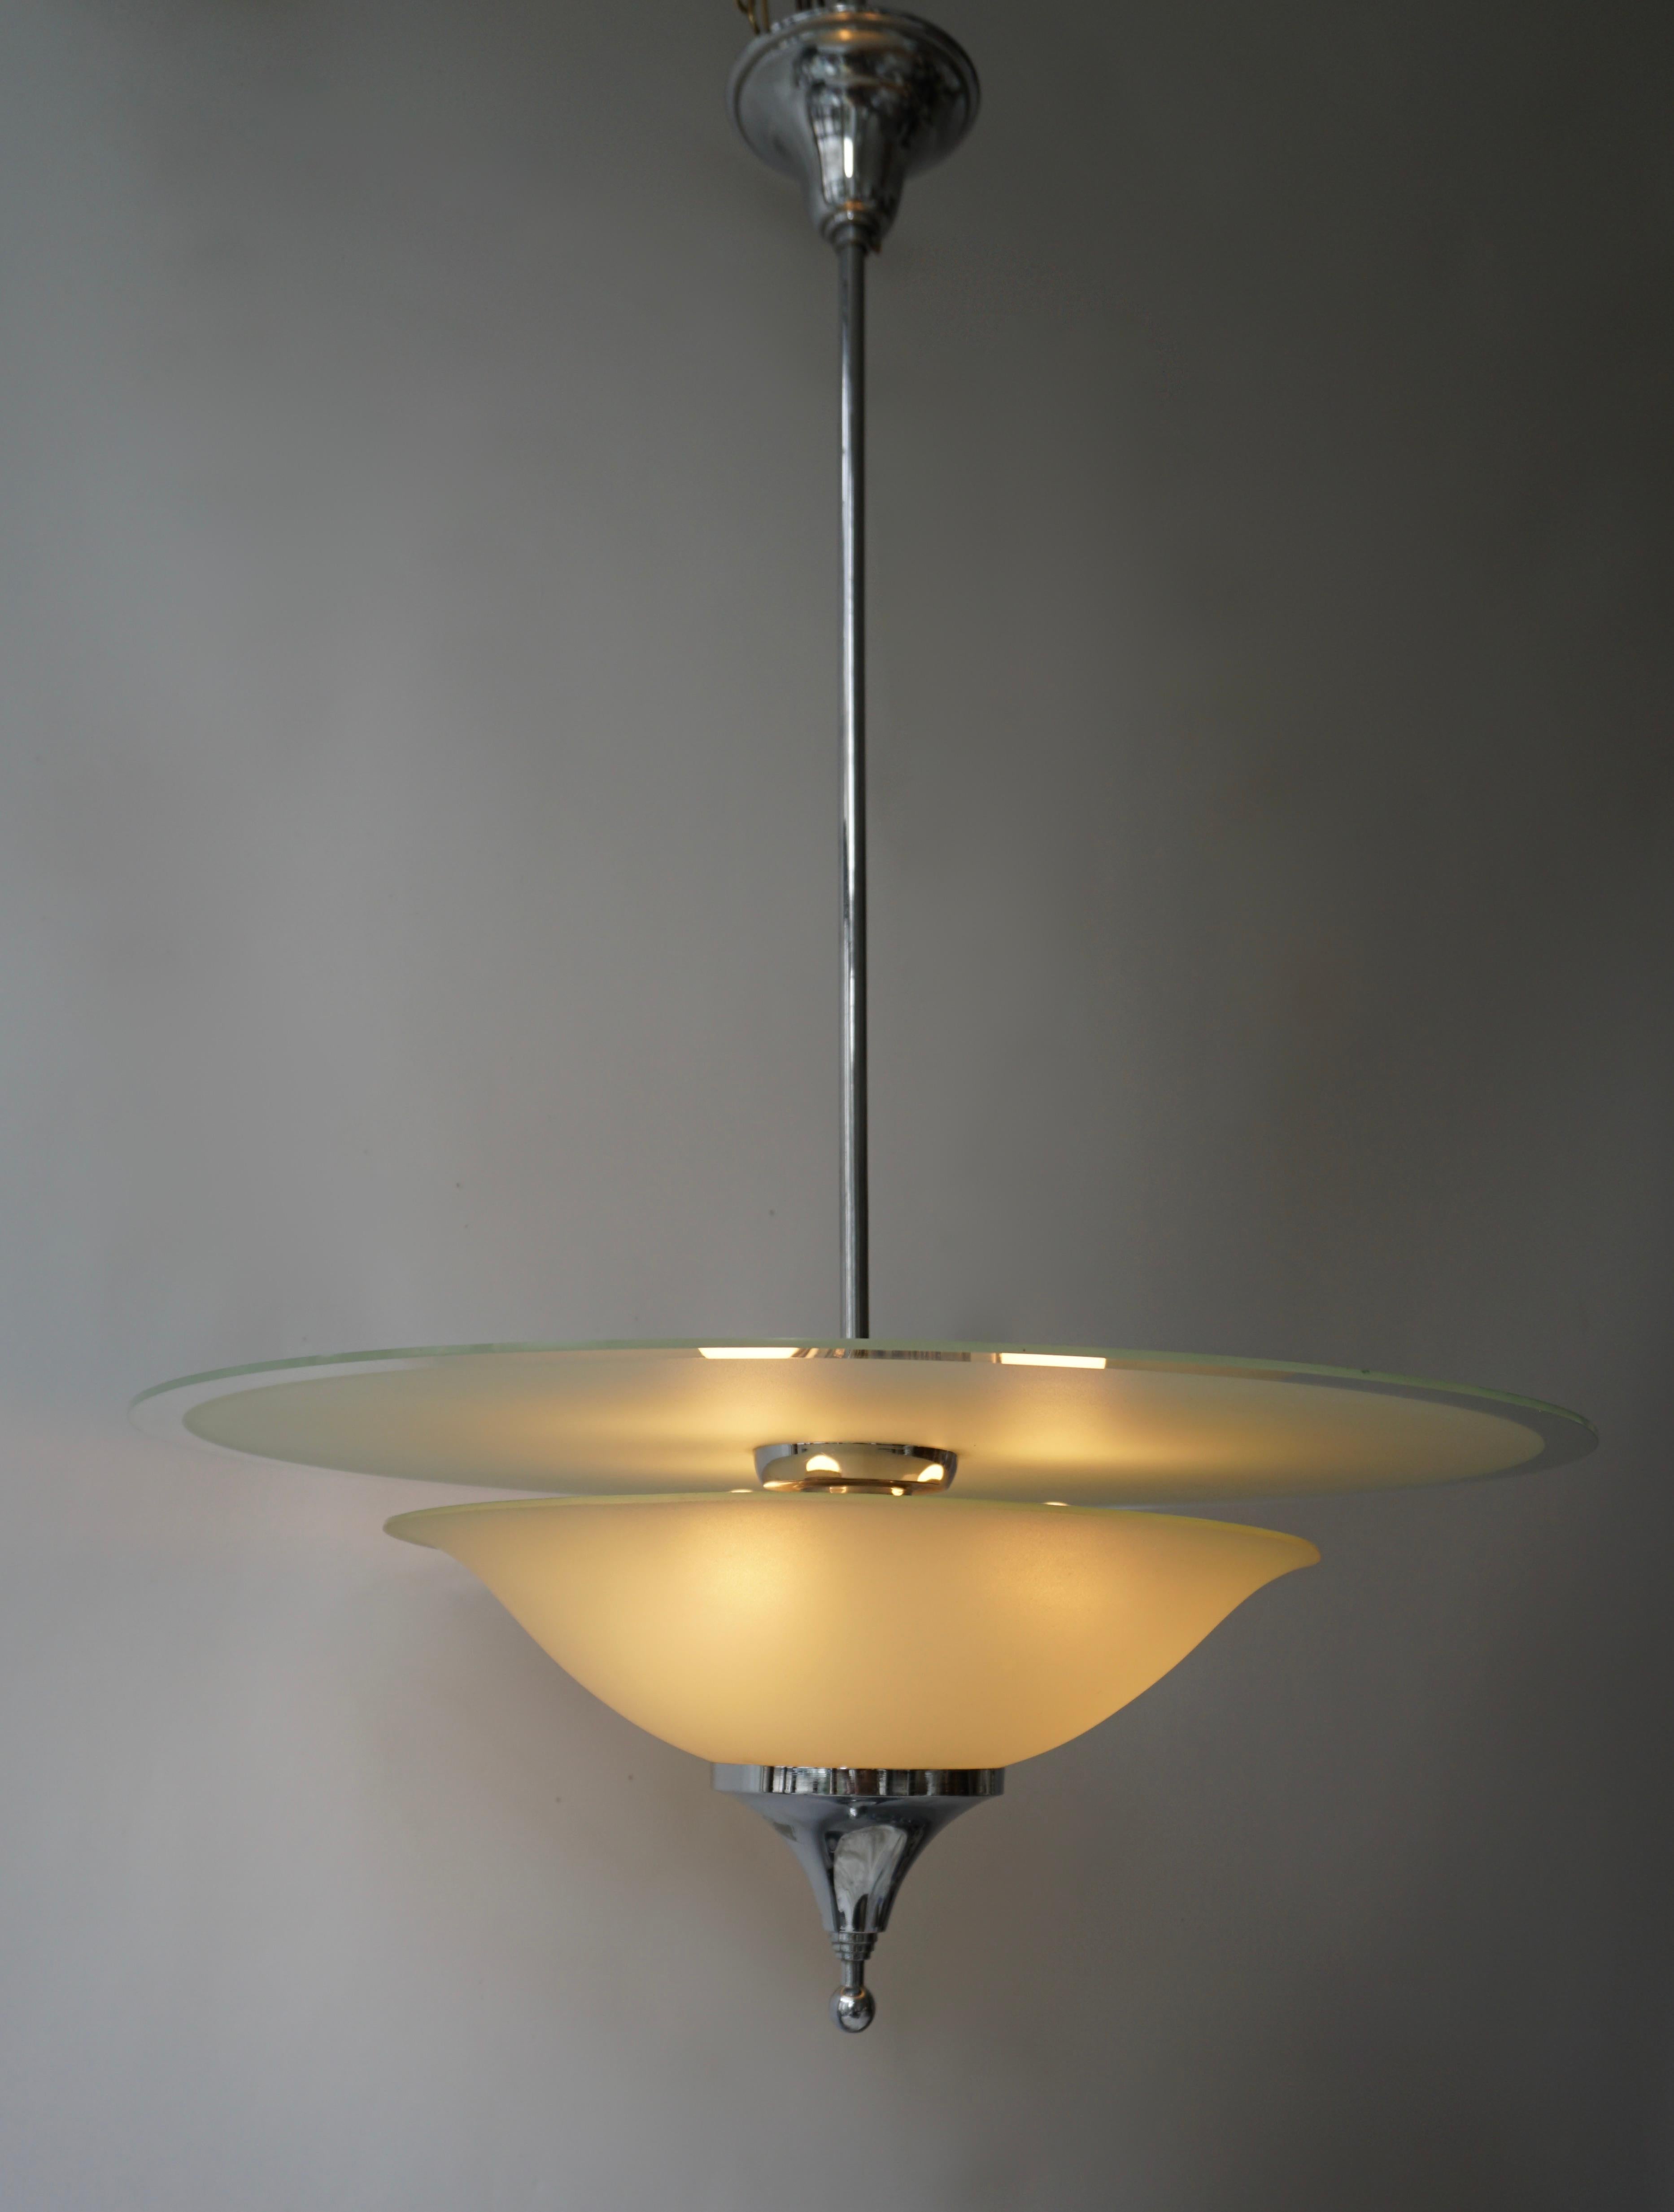 20th Century Art Deco Ceiling Light in Glass and Chrome, Belgium, 1930s For Sale